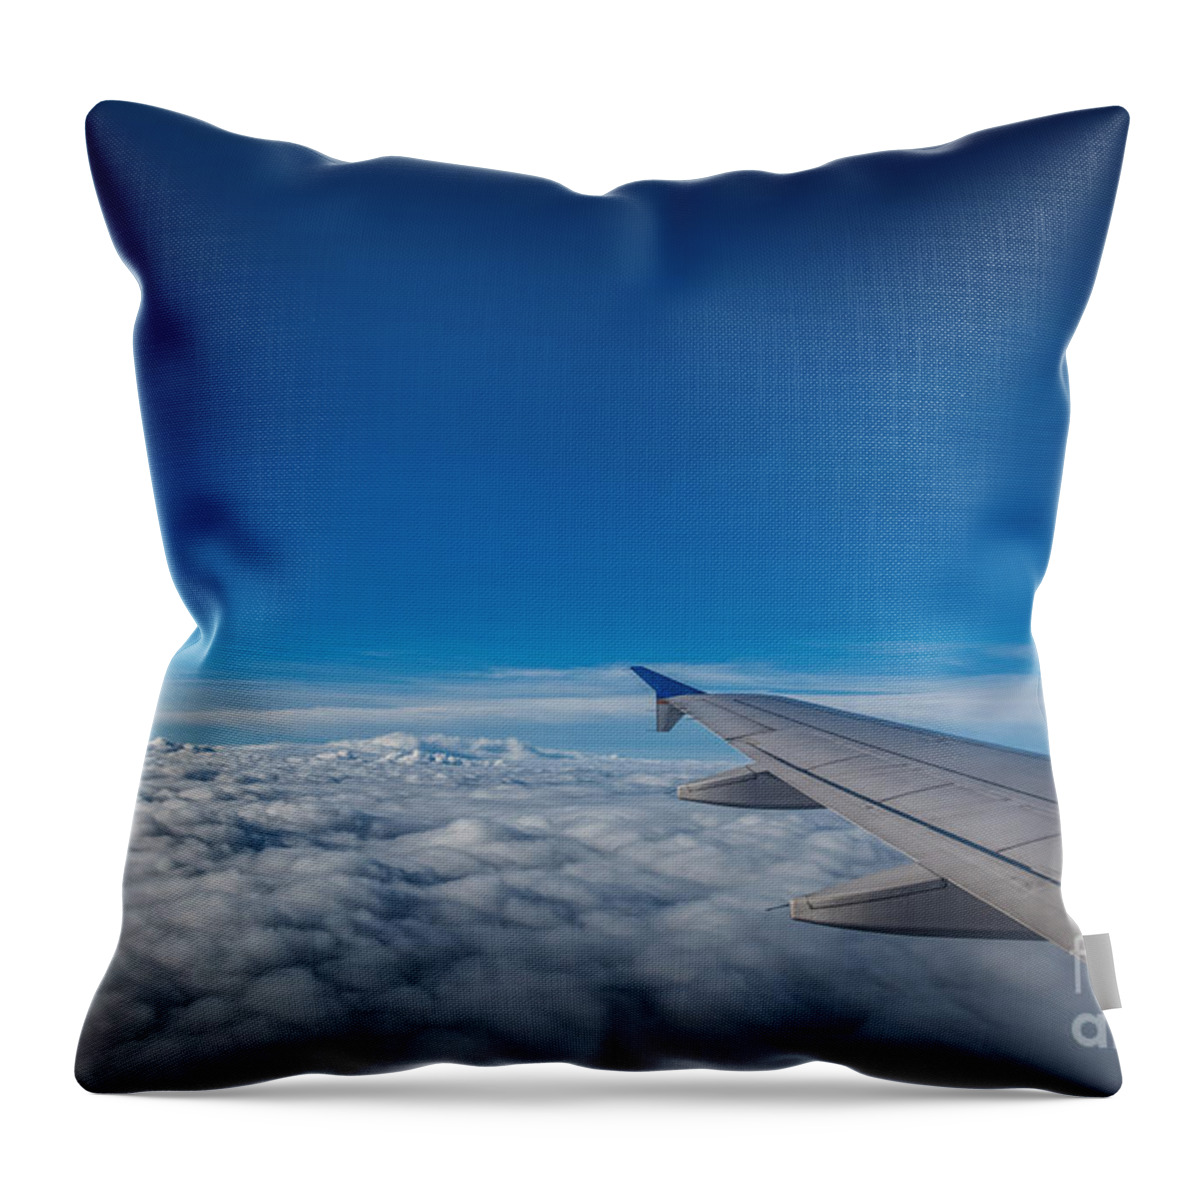 Above The Clouds Throw Pillow featuring the photograph Above The Clouds by Michael Ver Sprill